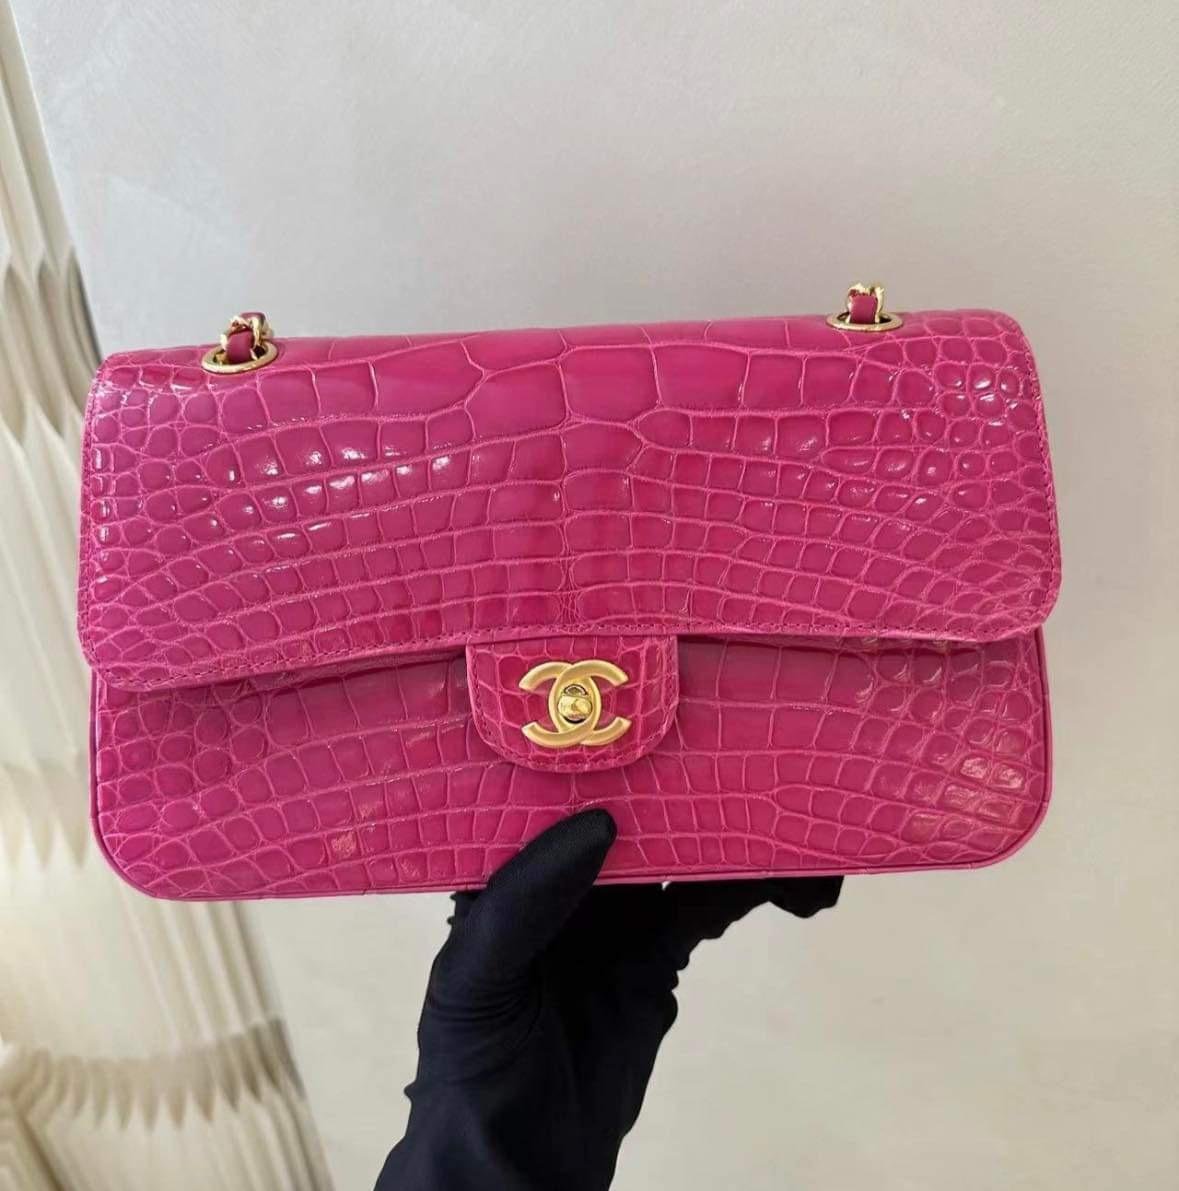 Chanel Hot Pink Shiny Alligator Jumbo Double Flap Bag with Gold Hardware Neuf - En vente à New York, NY